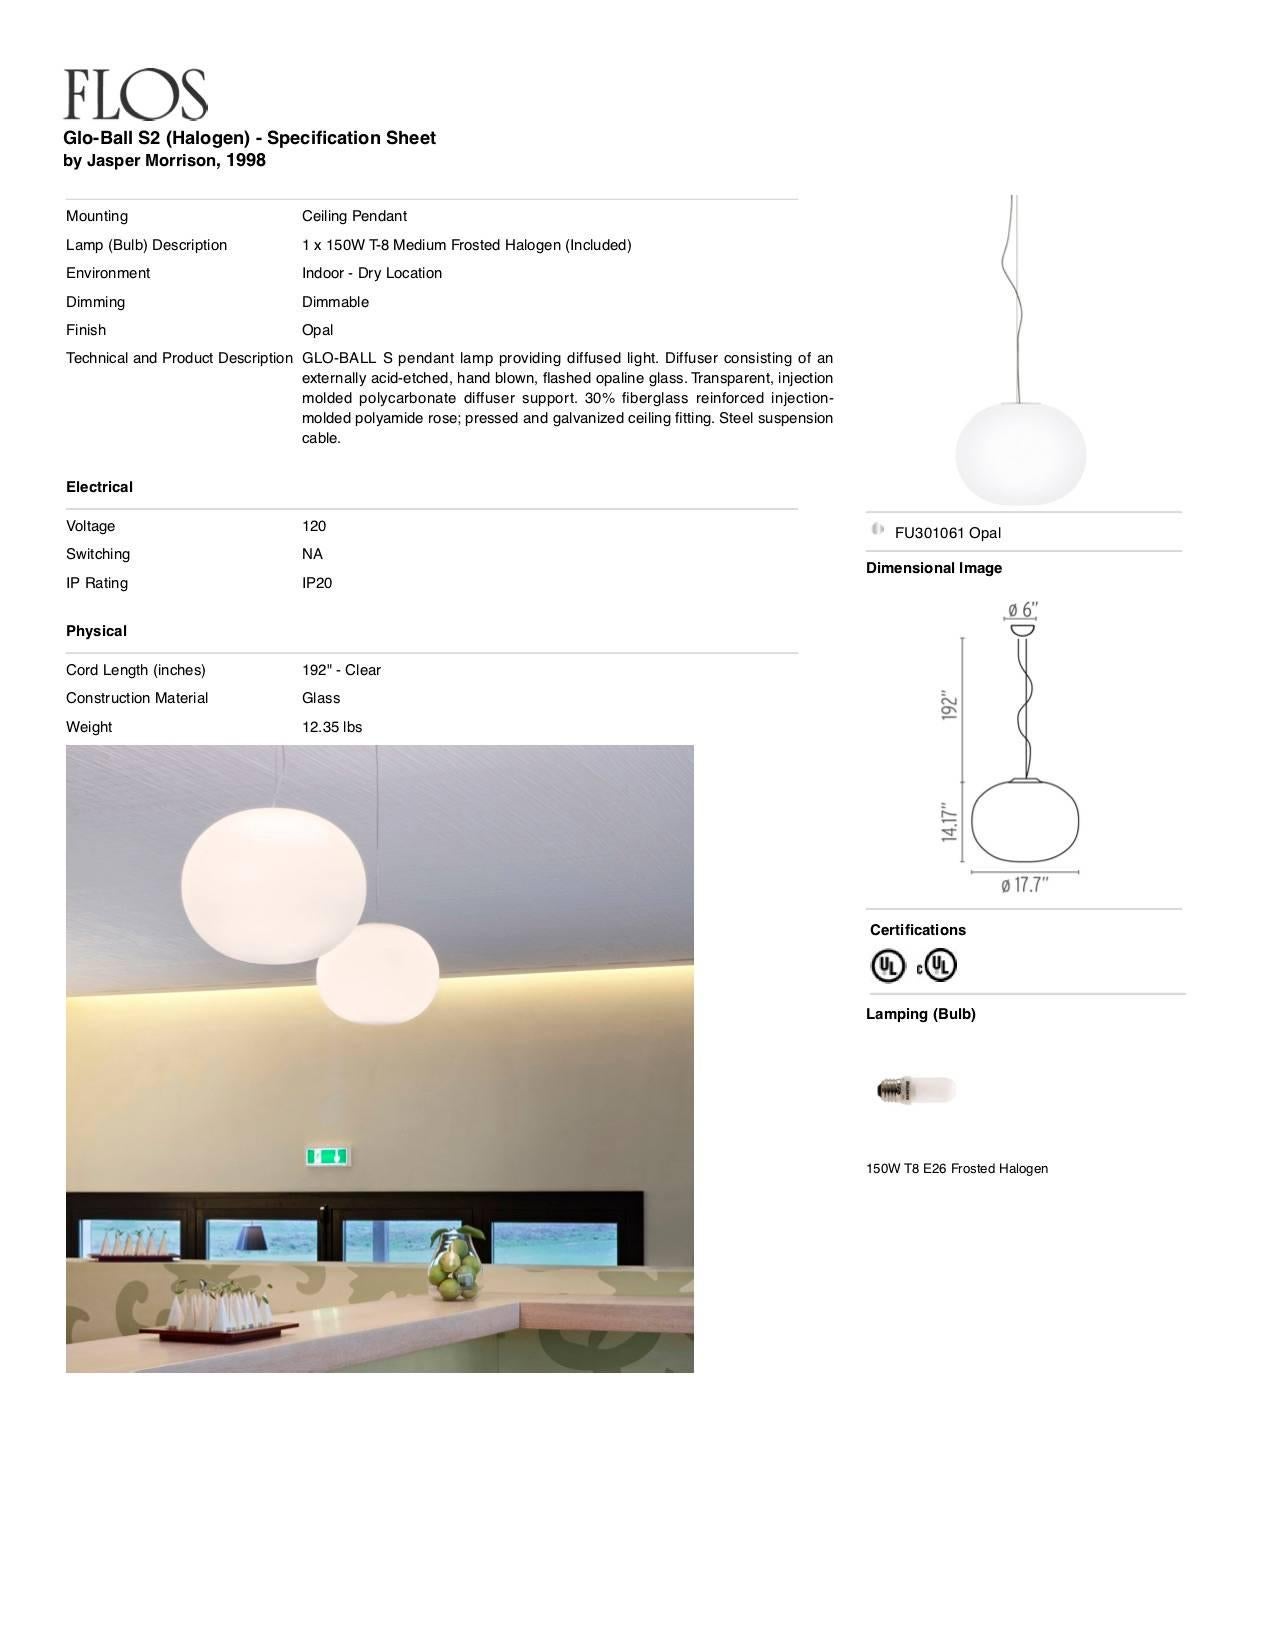 Jasper Morrison Modern Sphere Glass Stainless Steel S2 Pendant Lamp for FLOS In New Condition For Sale In Brooklyn, NY